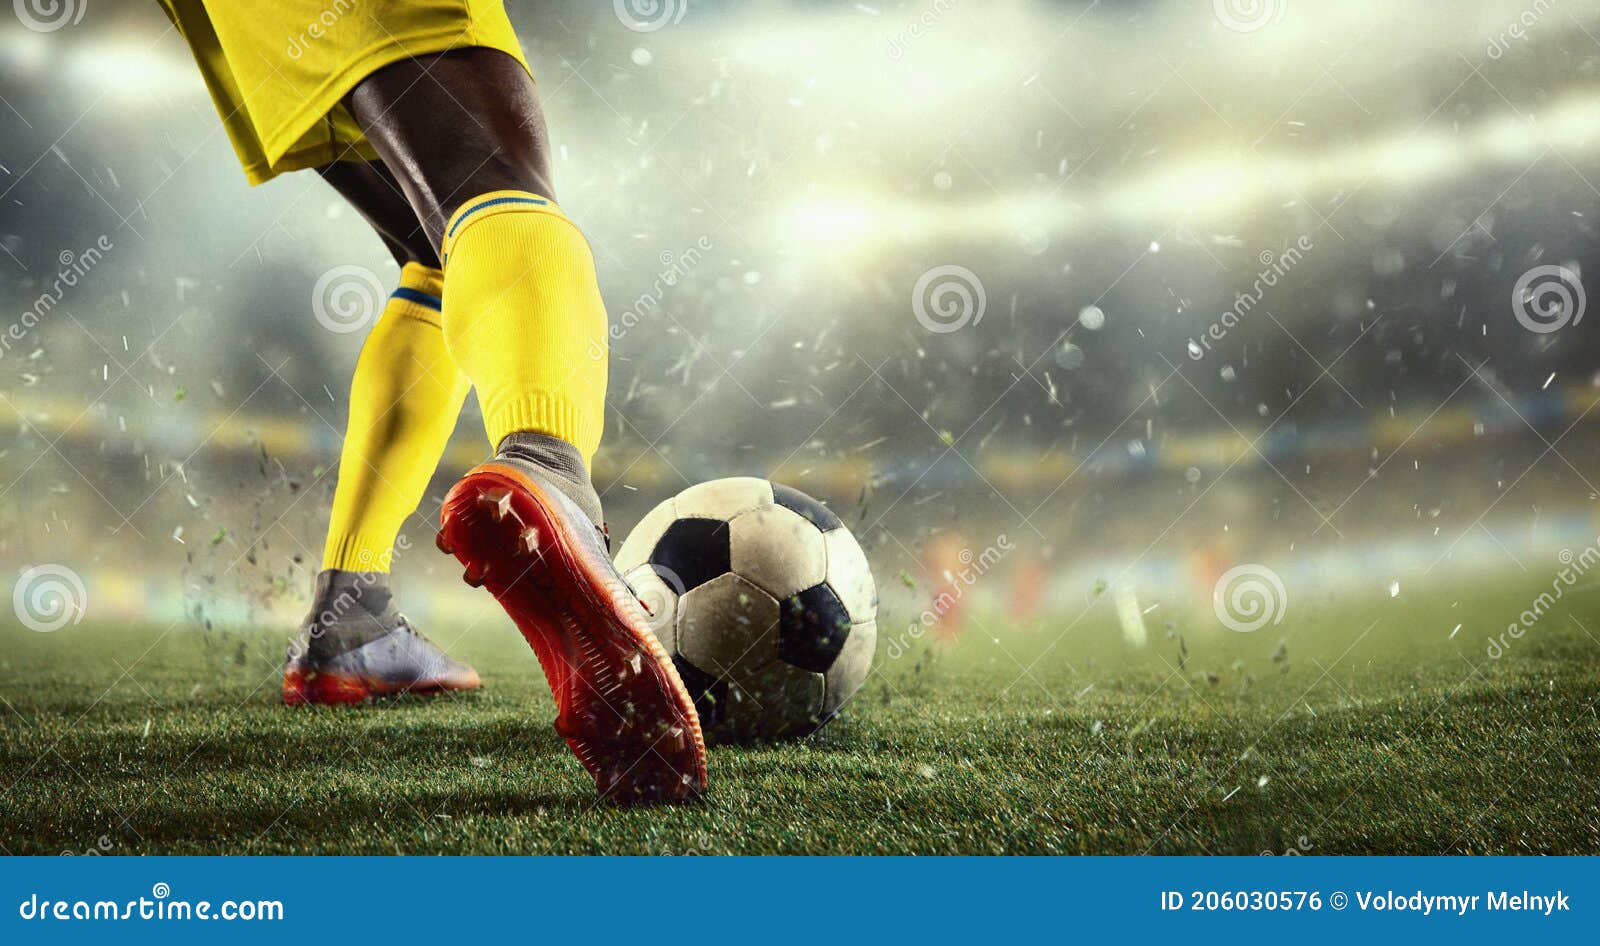 736 Football Flyer Photos Free Royalty Free Stock Photos From Dreamstime